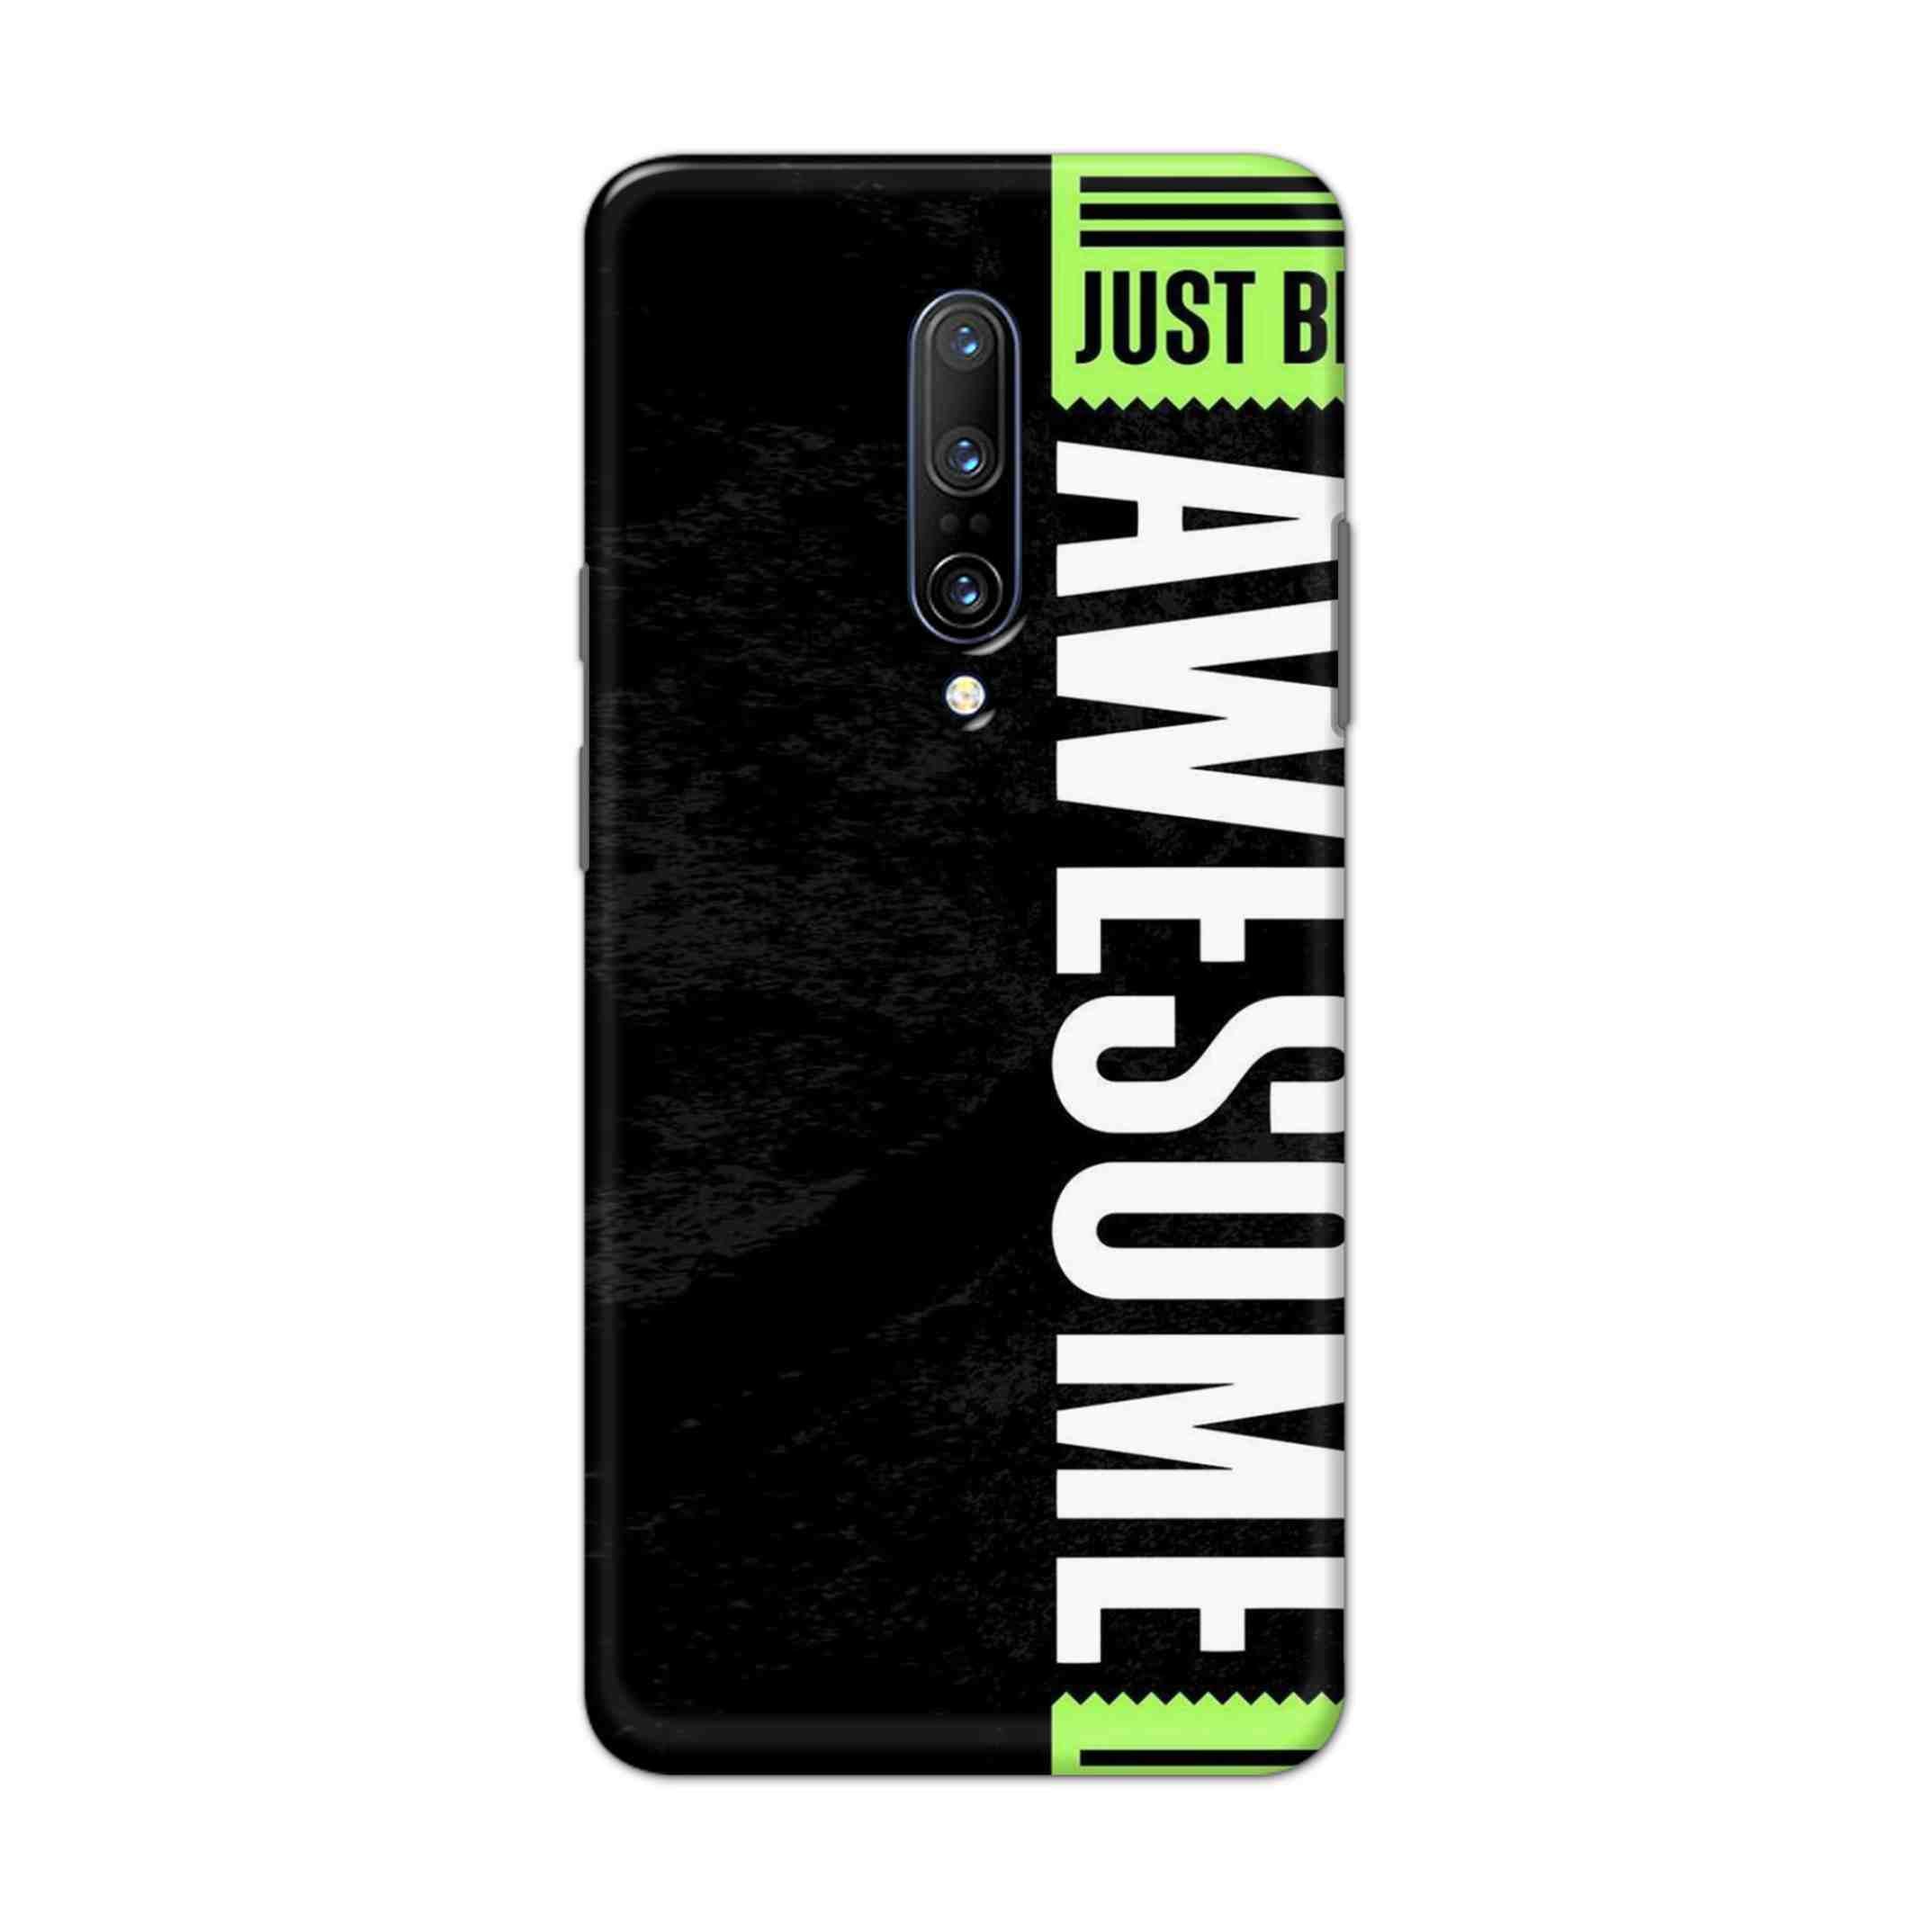 Buy Awesome Street Hard Back Mobile Phone Case Cover For OnePlus 7 Pro Online